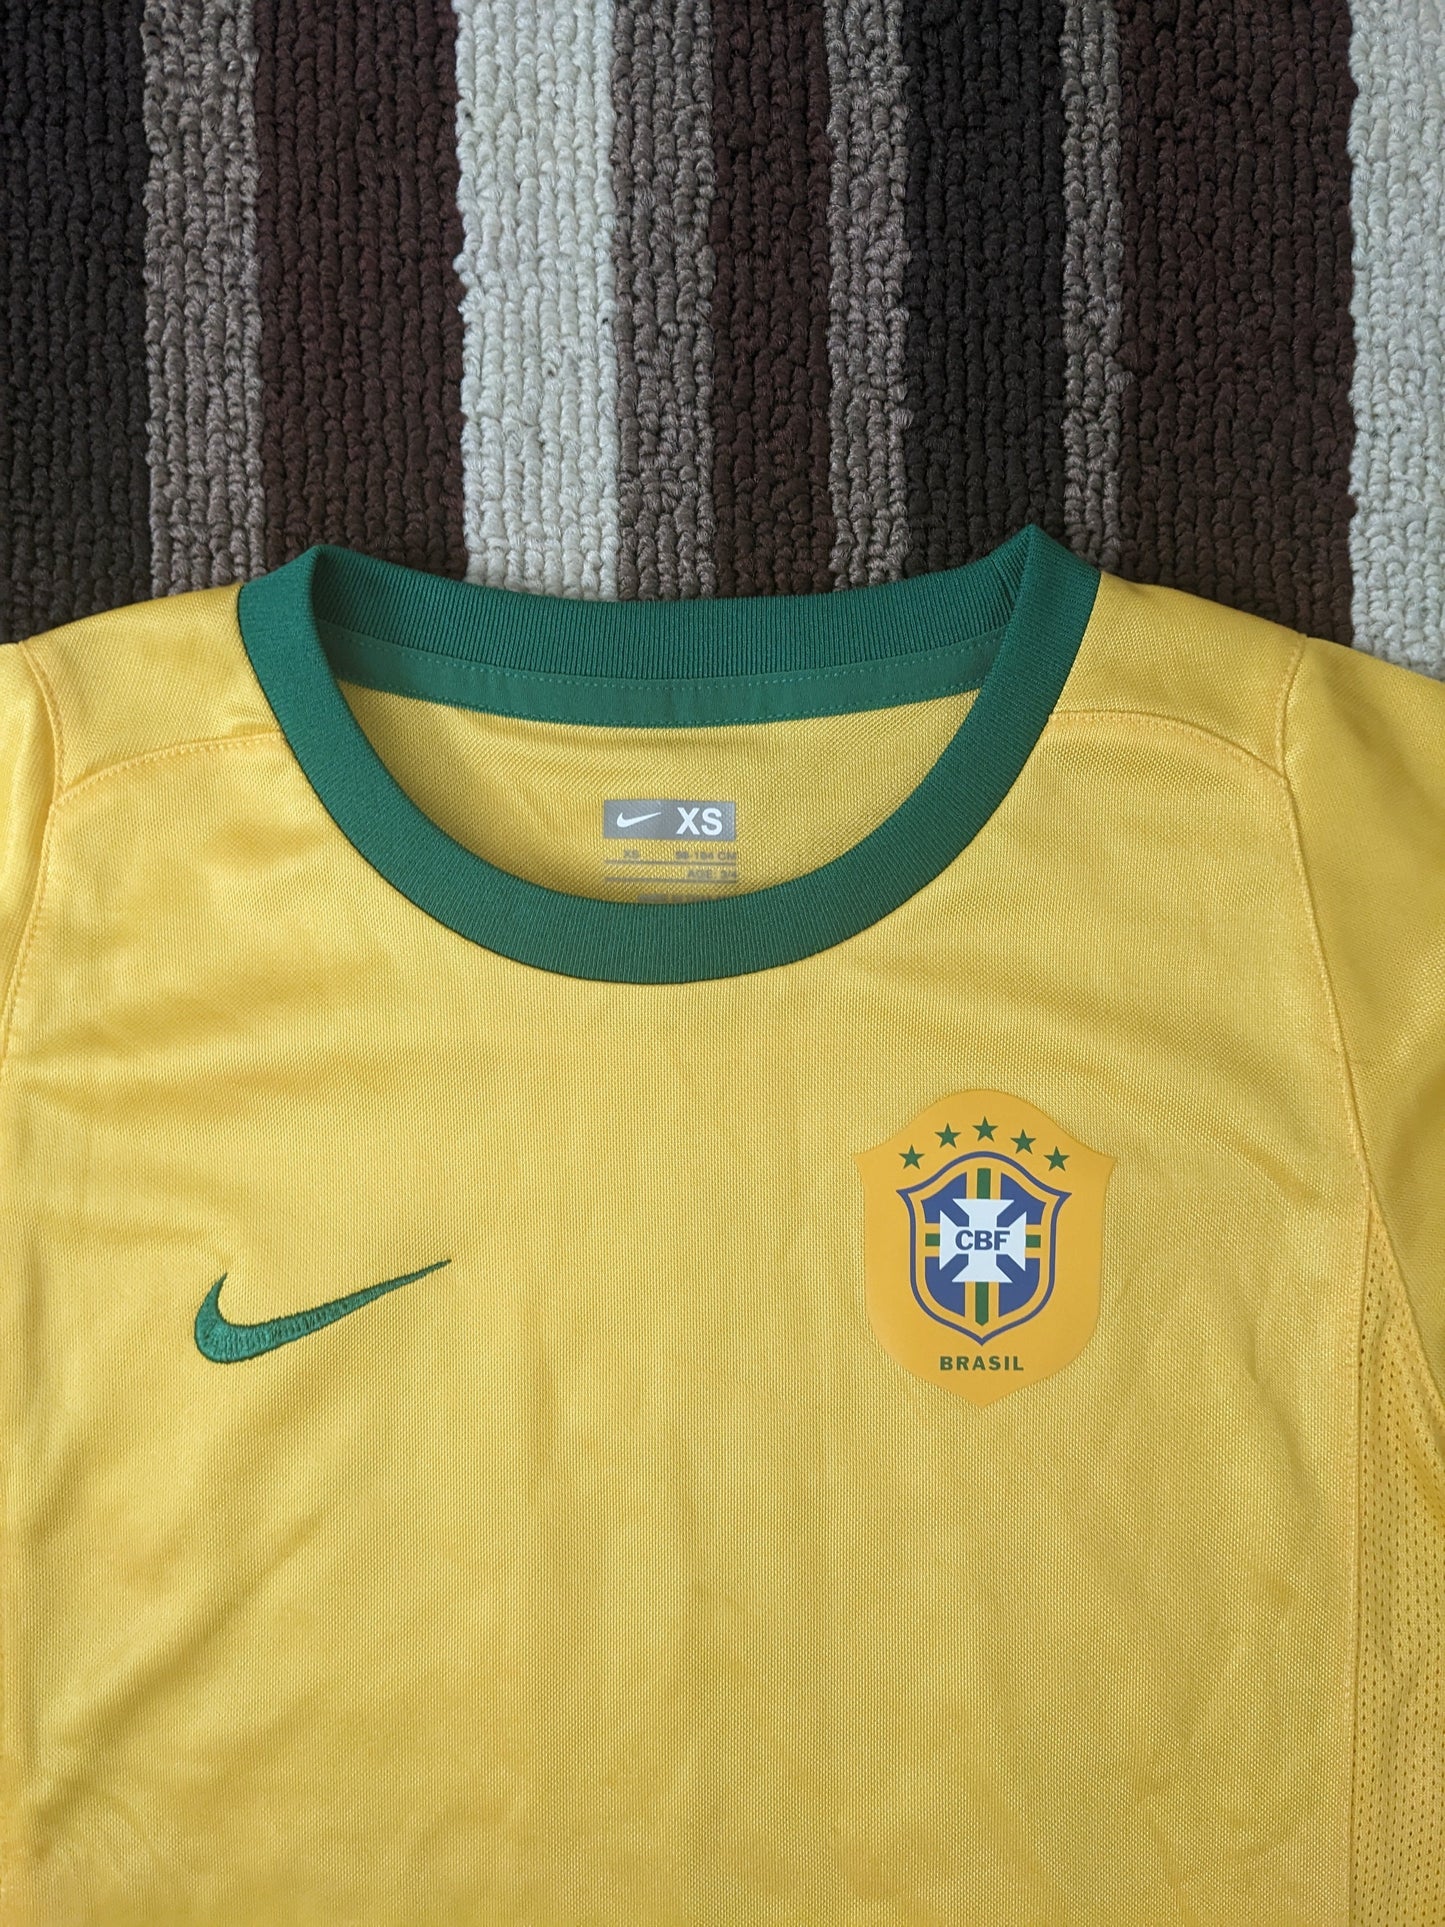 Brazil home jersey (YOUTH XS) *BRAND NEW WITH TAGS